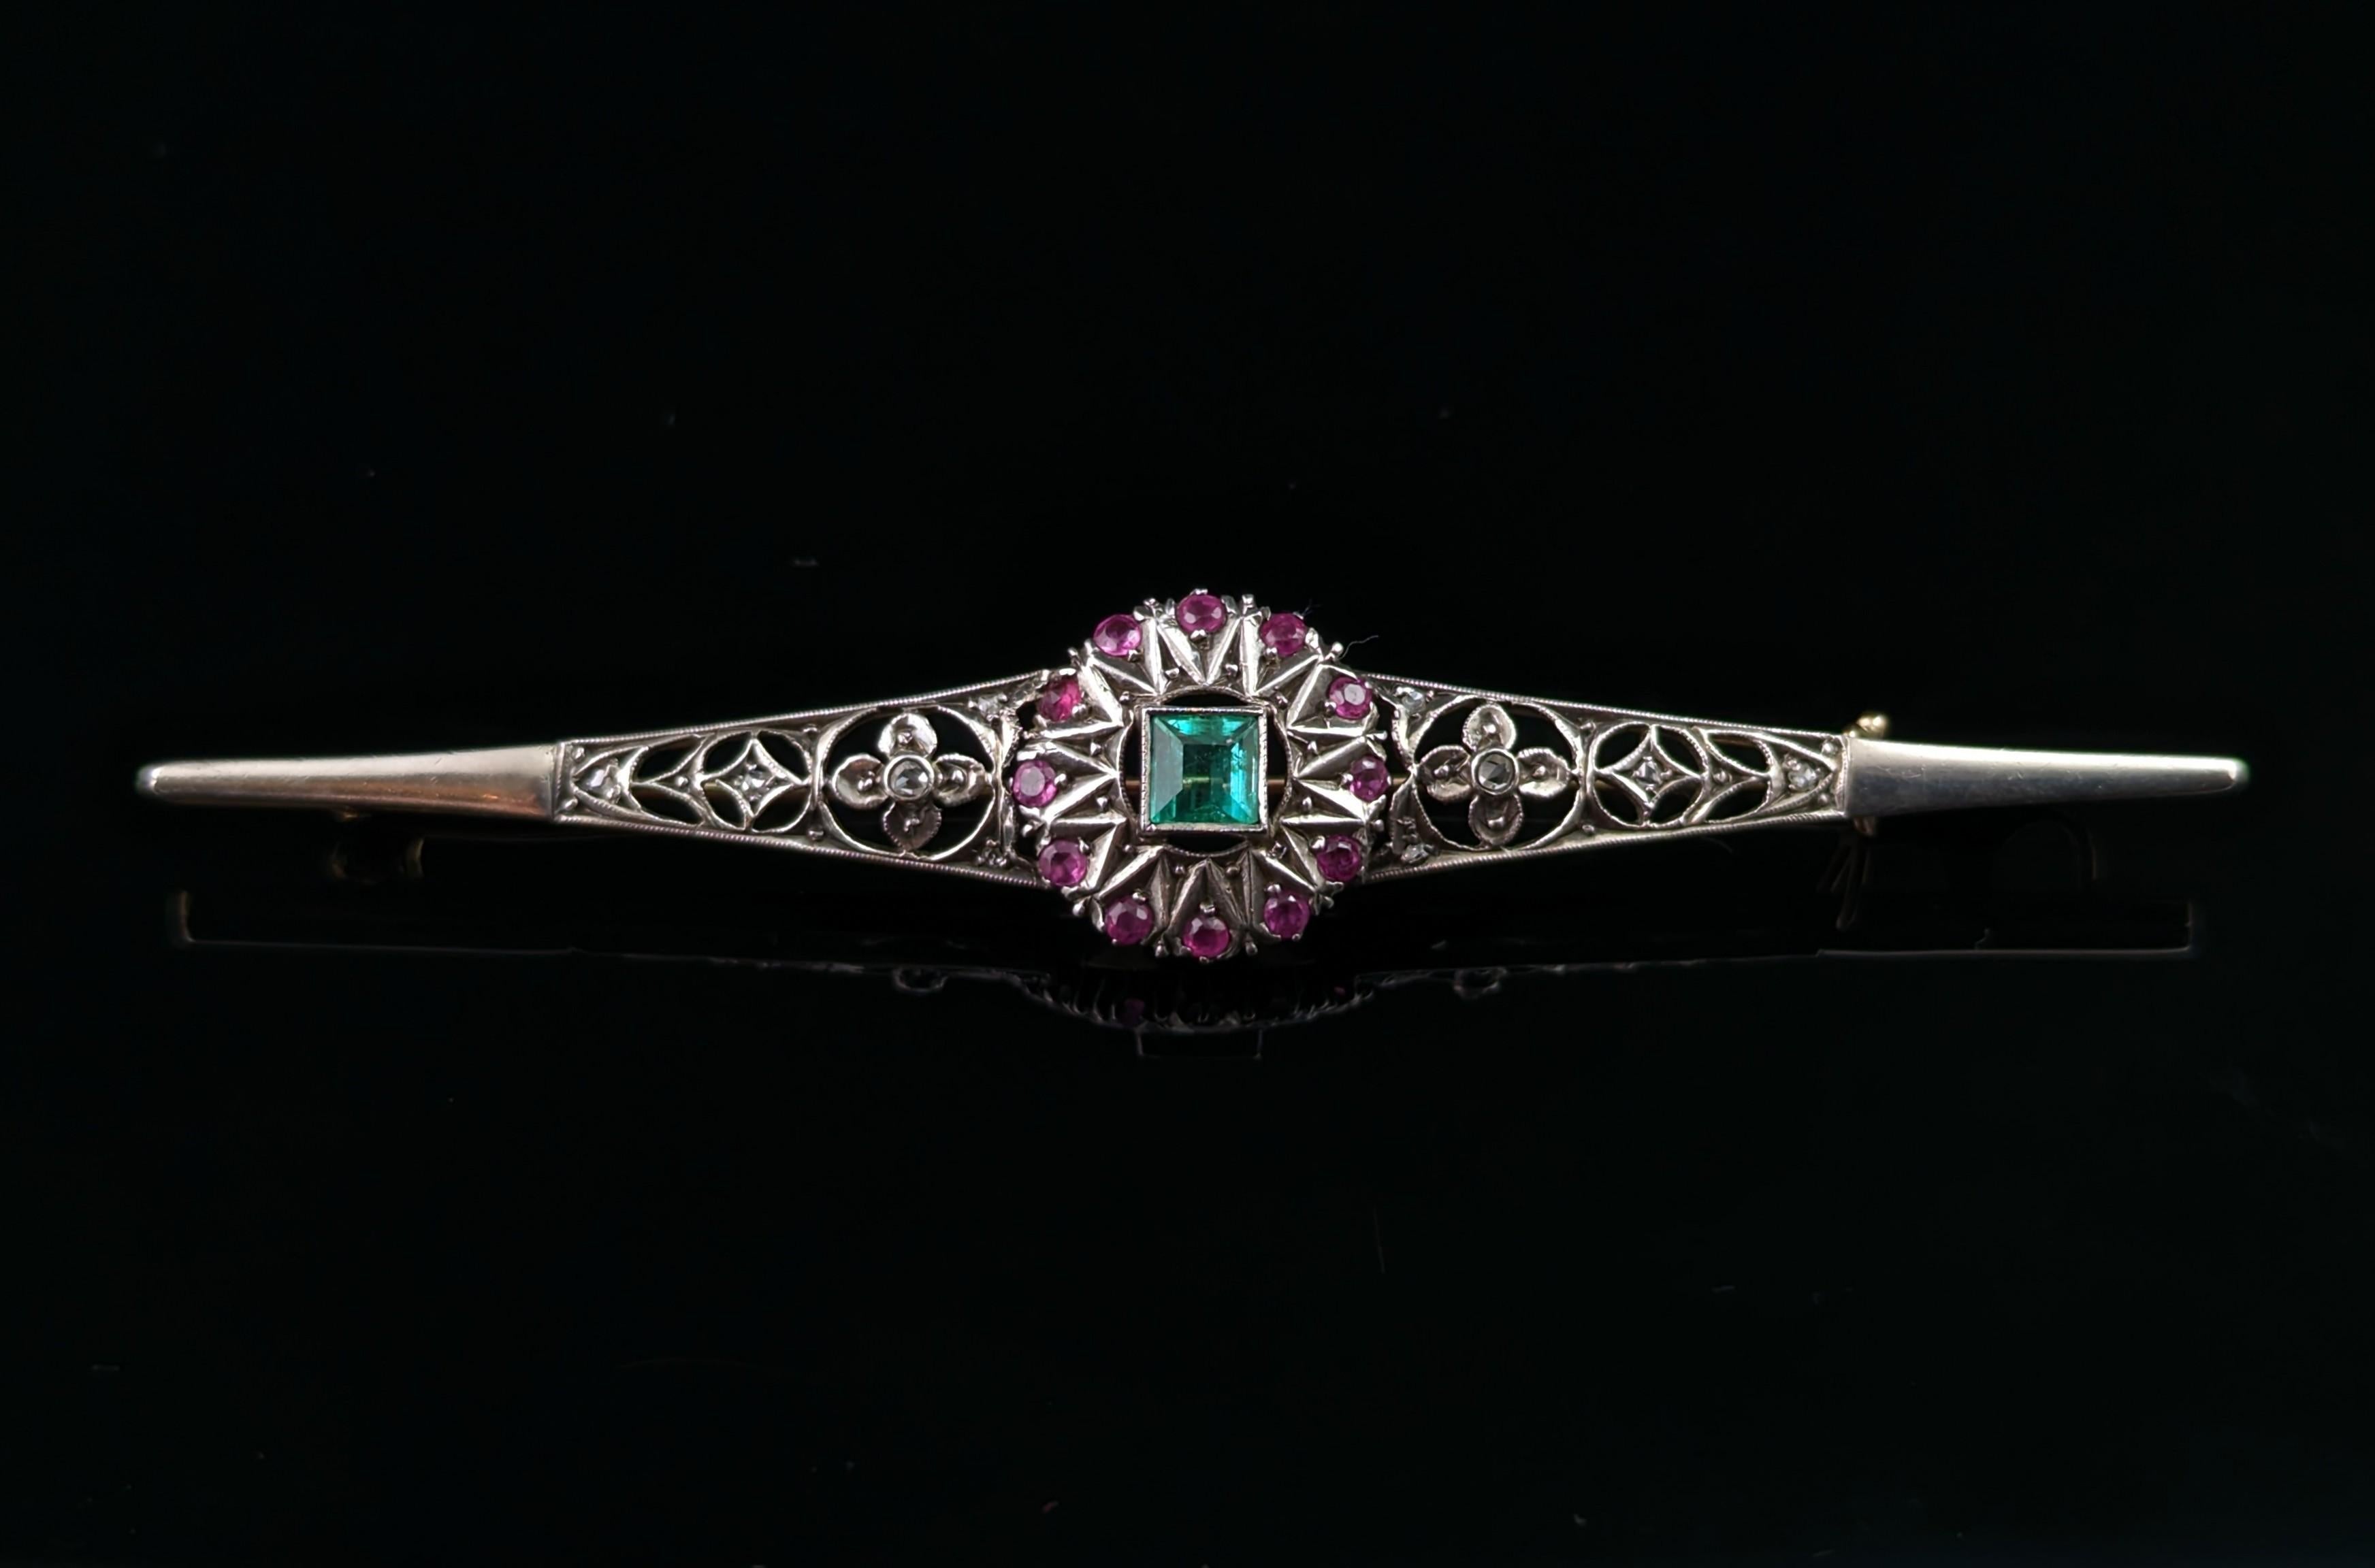 This magnificent antique Art Nouveau Emerald, Diamond and Ruby brooch is just breathtaking!

A beautifully designed piece with the greatest attention to detail, well crafted in the Art Nouveau manner with openwork and scrolling features, it is a bar